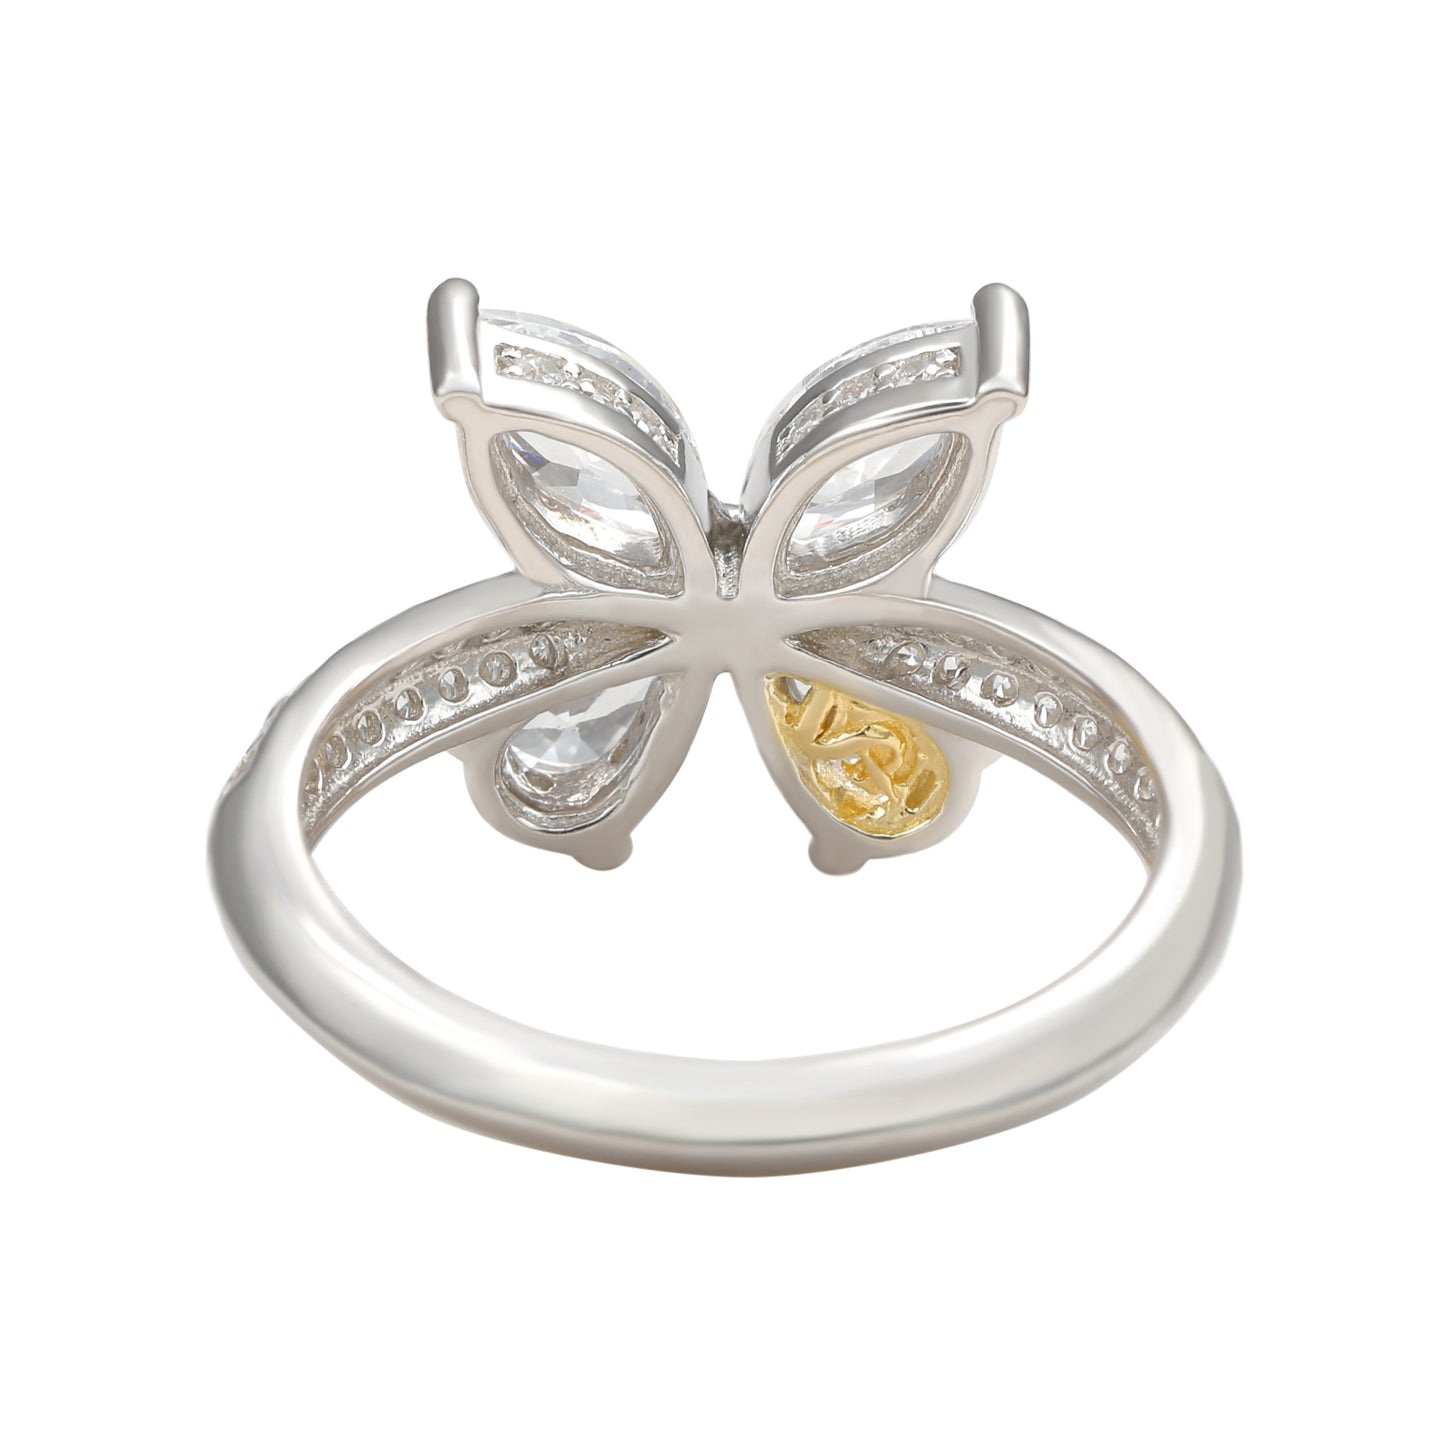 Suzy Levian Sterling Silver Cubic Zirconia Butterfly Ring